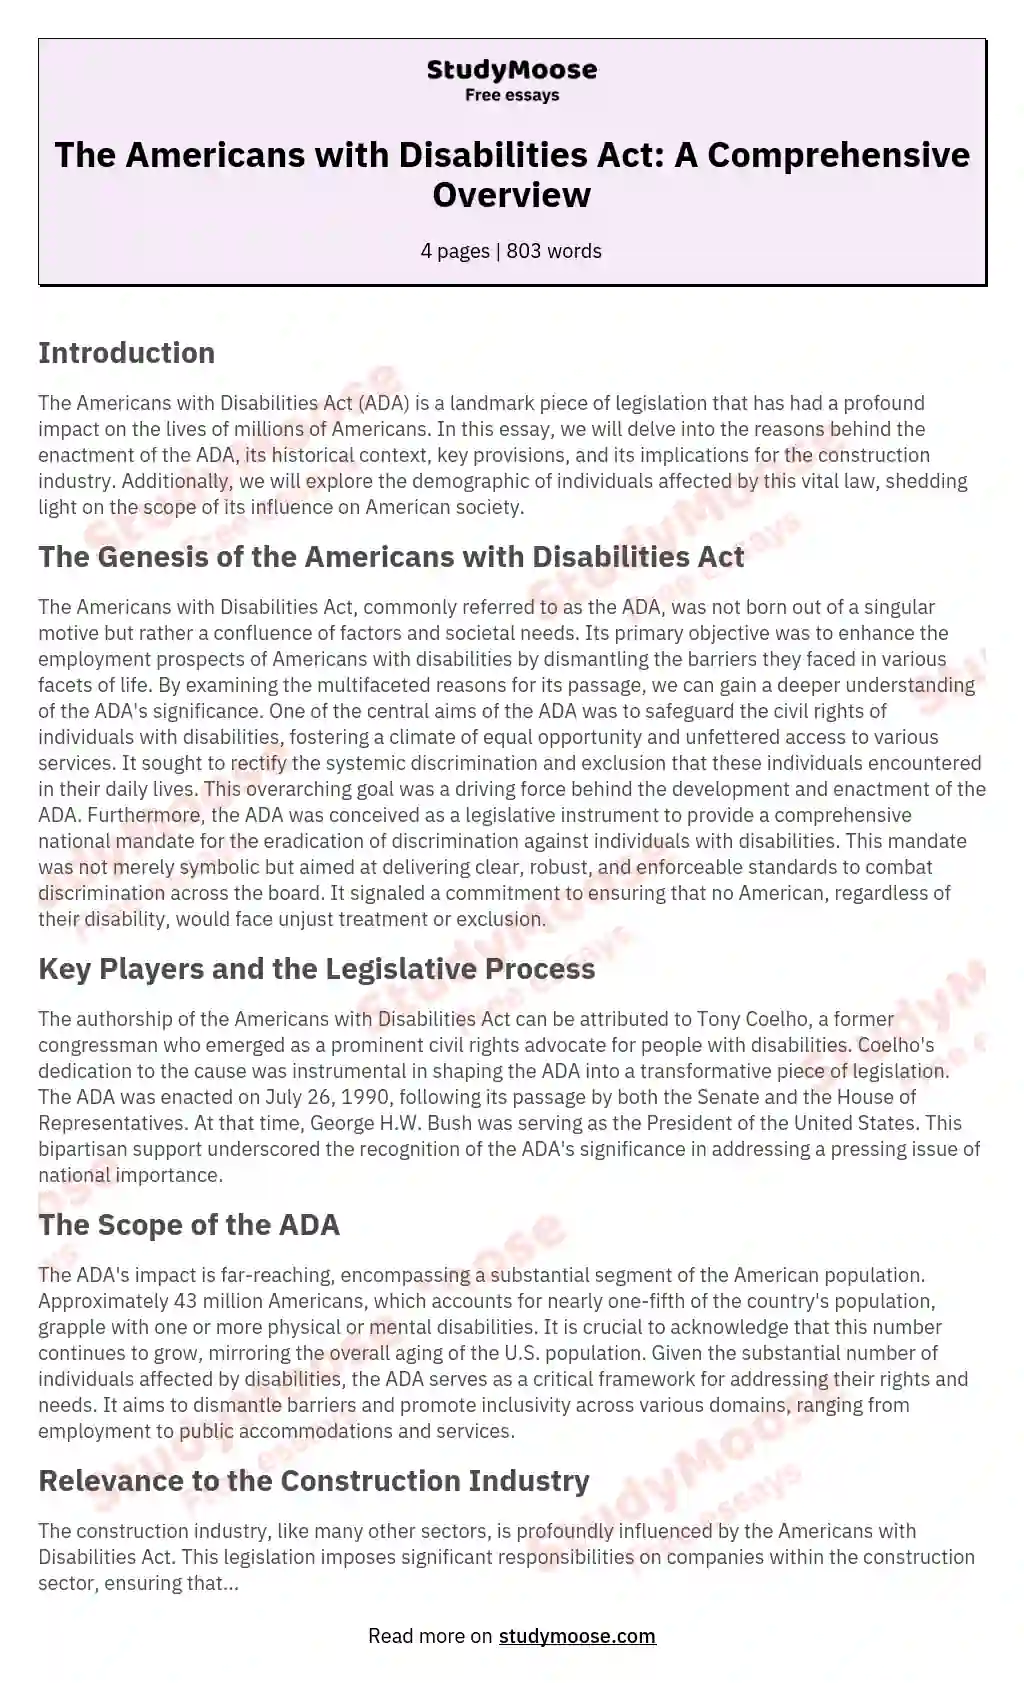 The Americans with Disabilities Act: A Comprehensive Overview essay